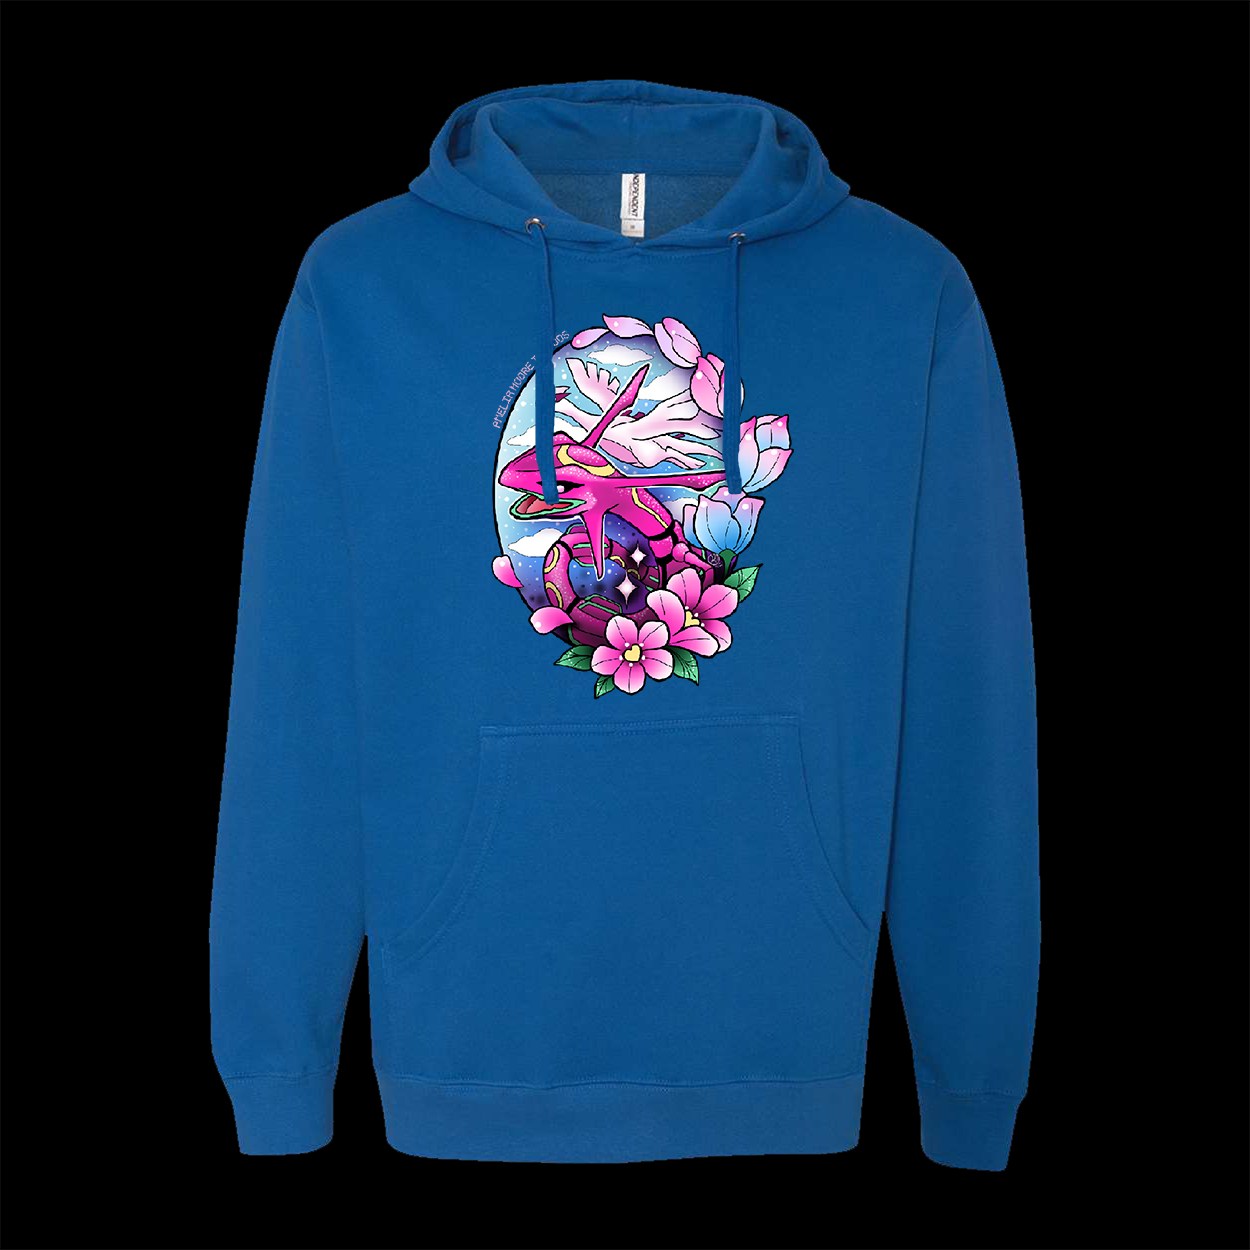 Amelia Moore rayquaza hoodie royal blue color